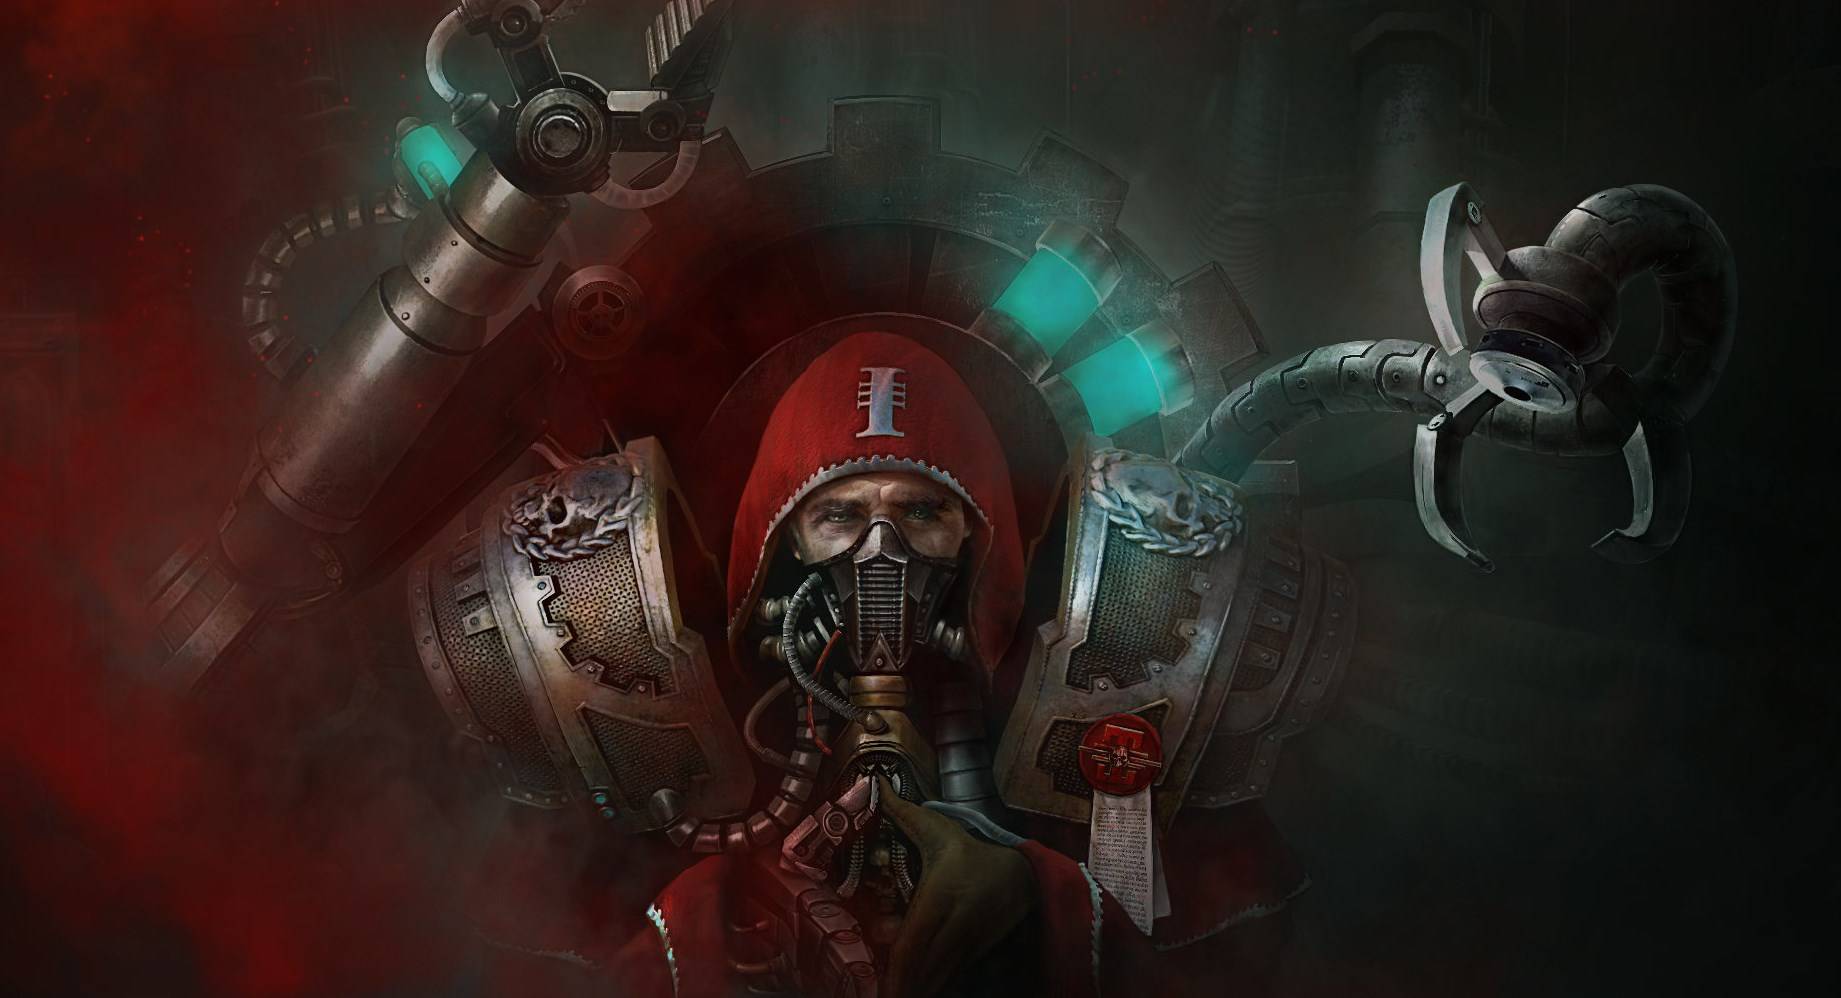 Warhammer 40,000: Inquisitor – Martyr is getting an expansion